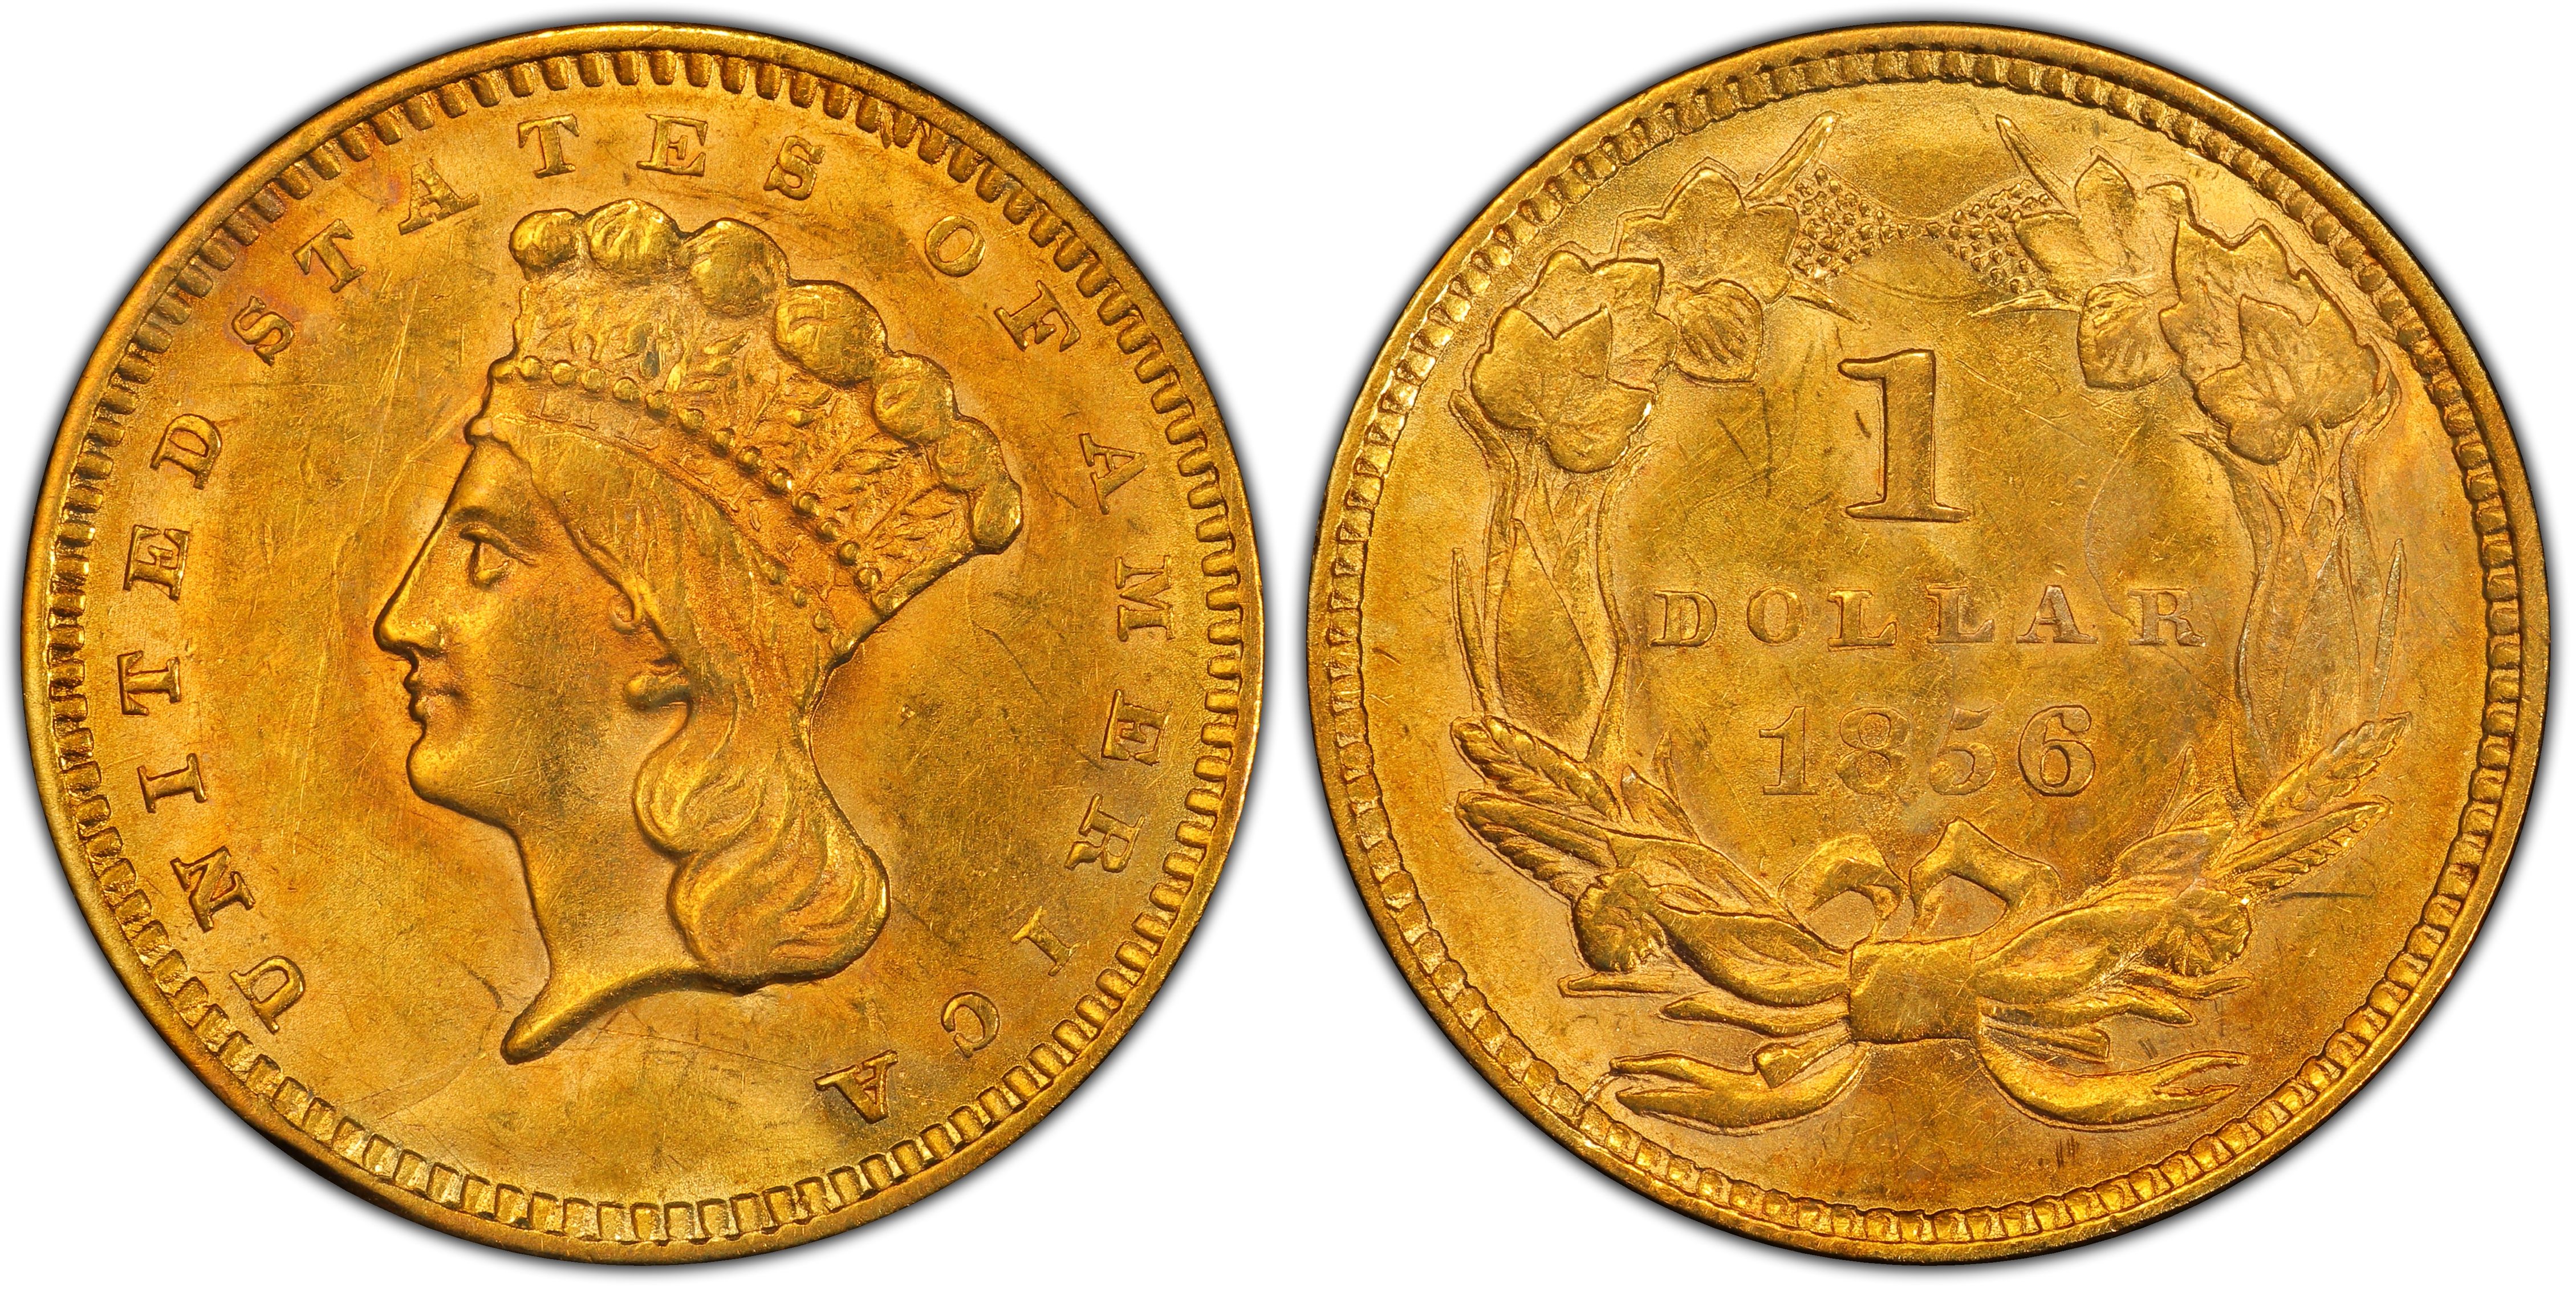 Images of Gold Dollar 1856 G$1 Slanted 5 - PCGS CoinFacts